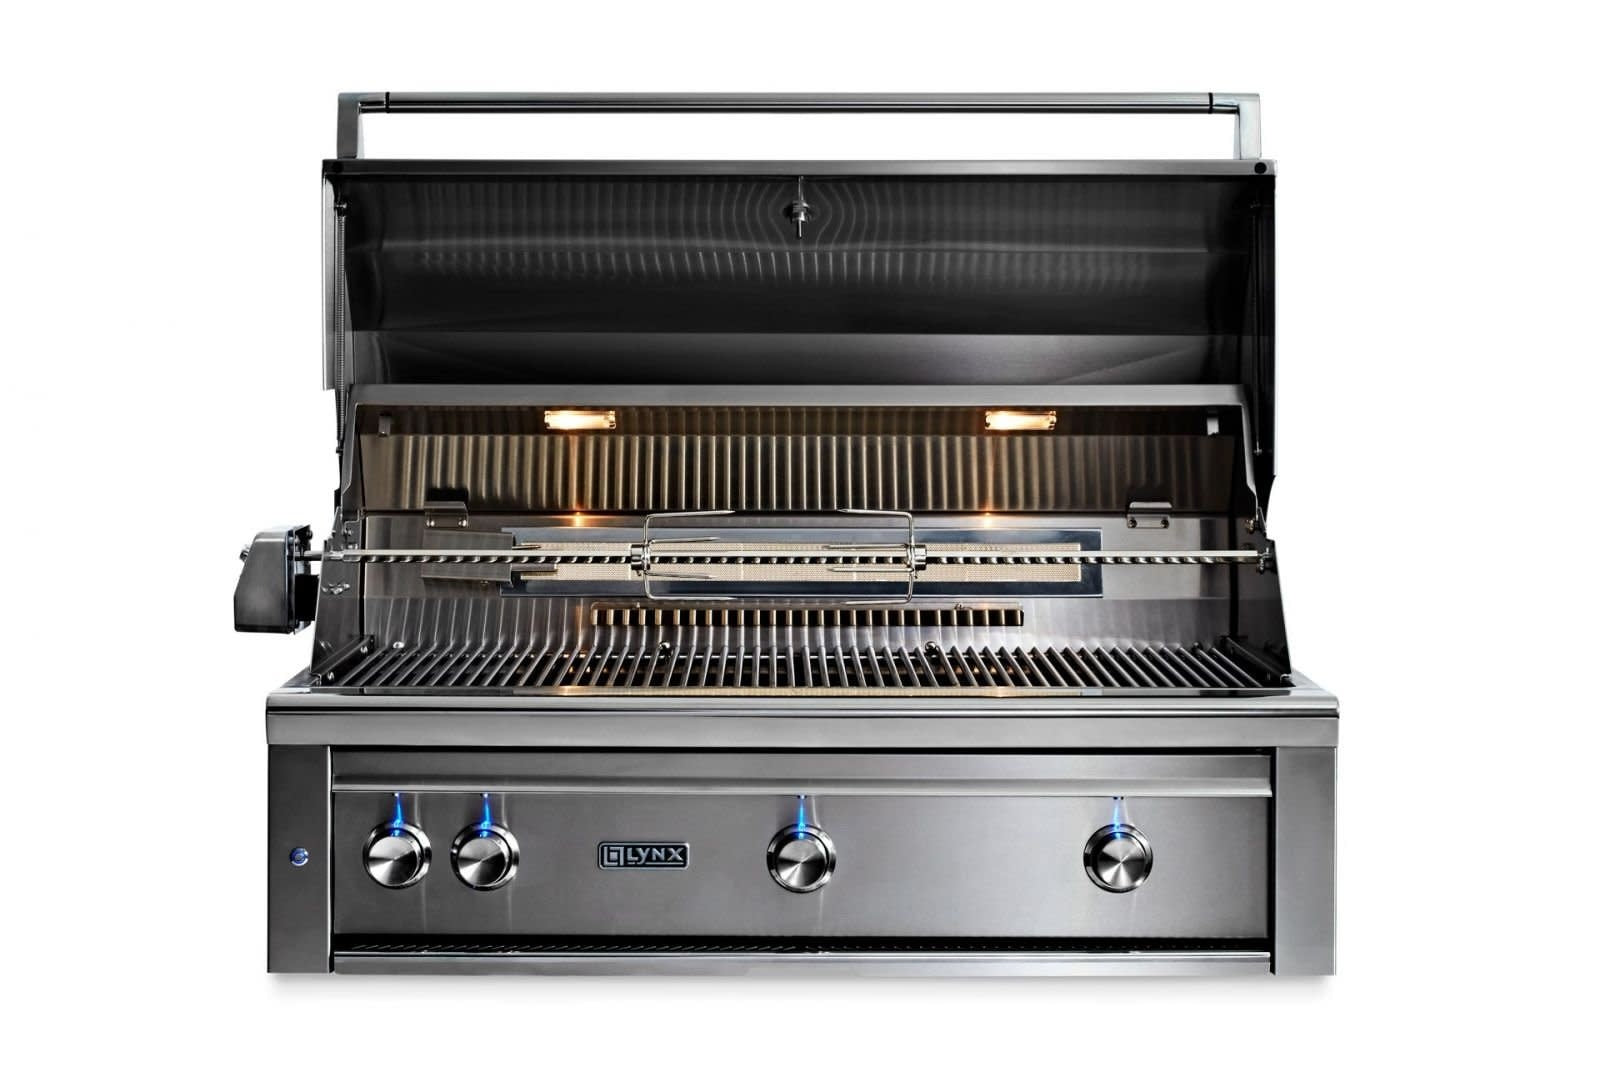 42" Built-In Grill  - 1 Trident™ w/ Rotisserie